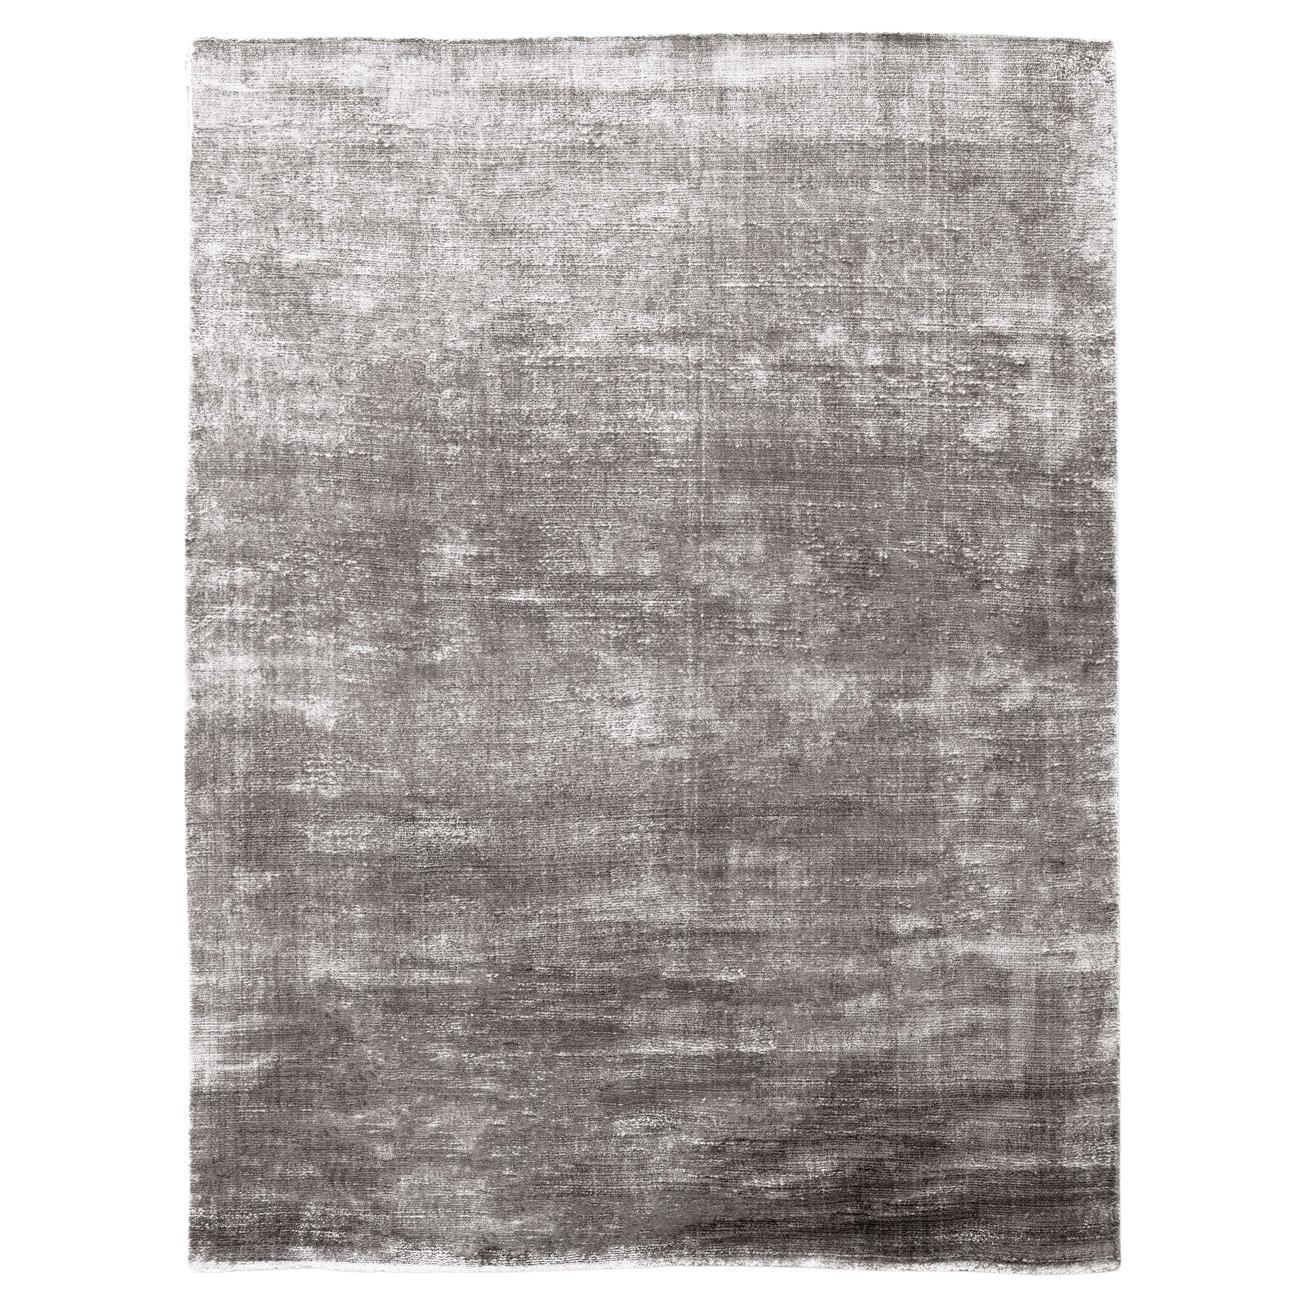 21st Century Viscose Shiny Velvety Luxury Rug by Deanna Comellini 250x350 cm For Sale